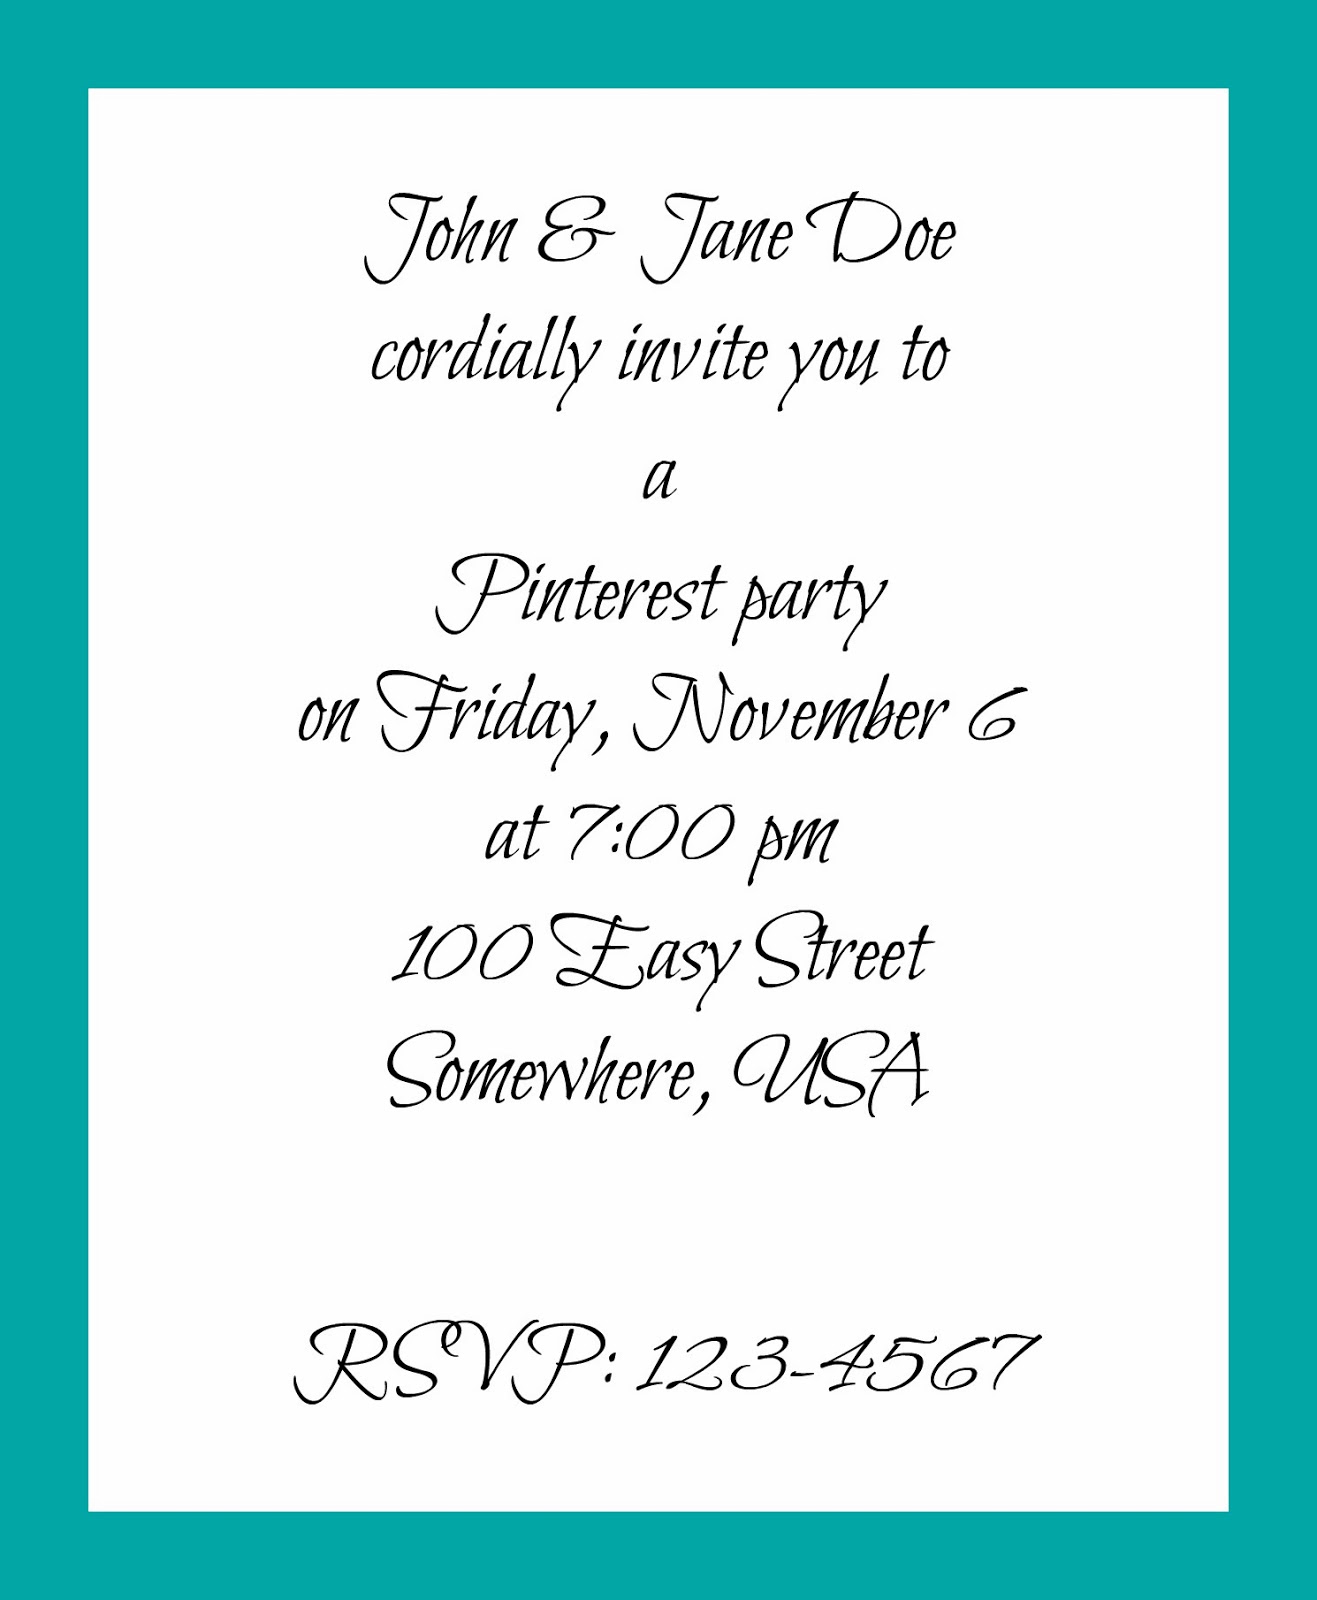  Sew} Daily: Hostessing: How to Write an Invitation {  free printables